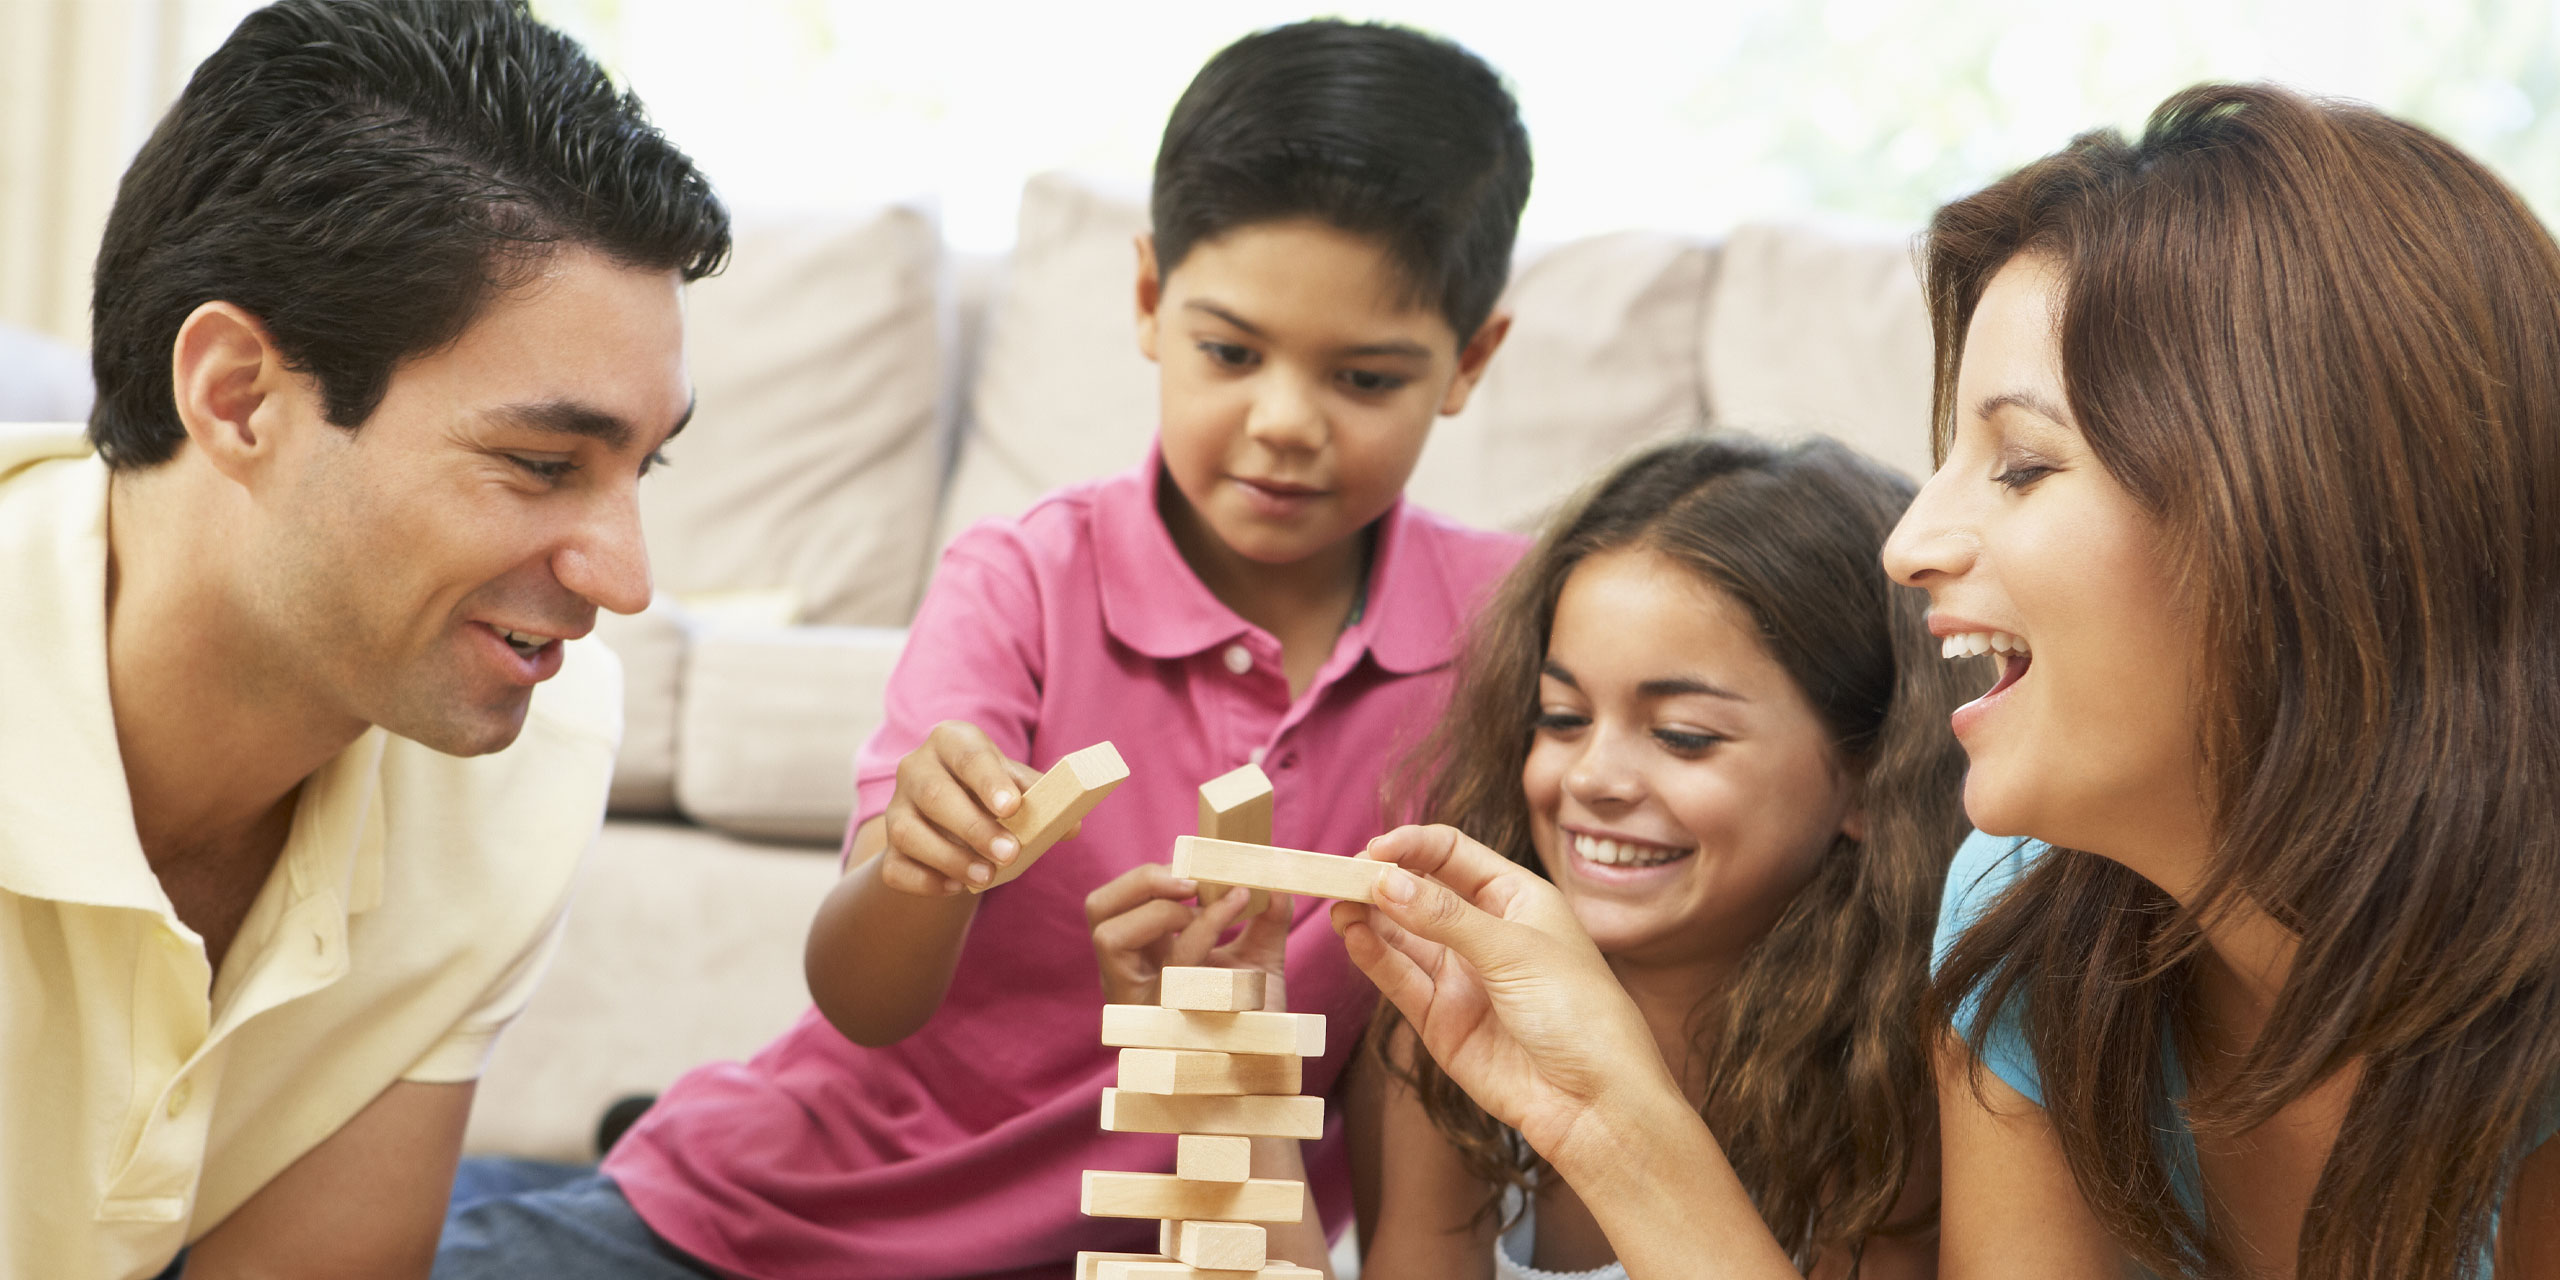 Family Playing Game; Courtesy of Monkey Business Images/Shutterstock.com